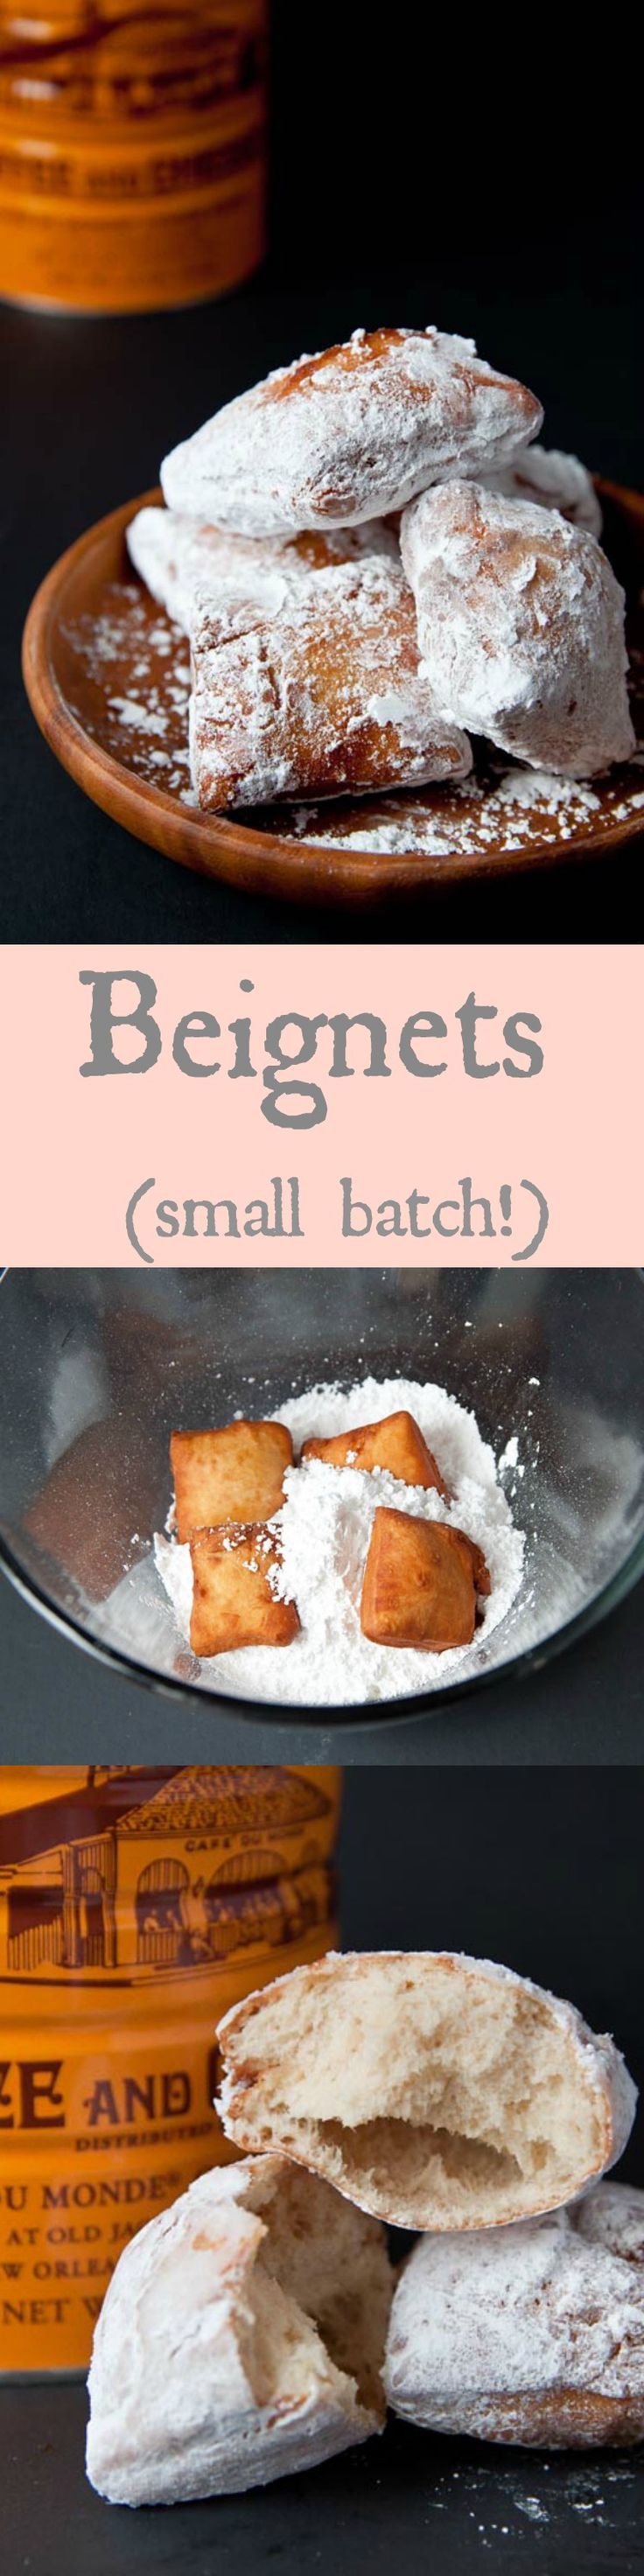 Beignets made from scratch! Just like Cafe du Monde.: